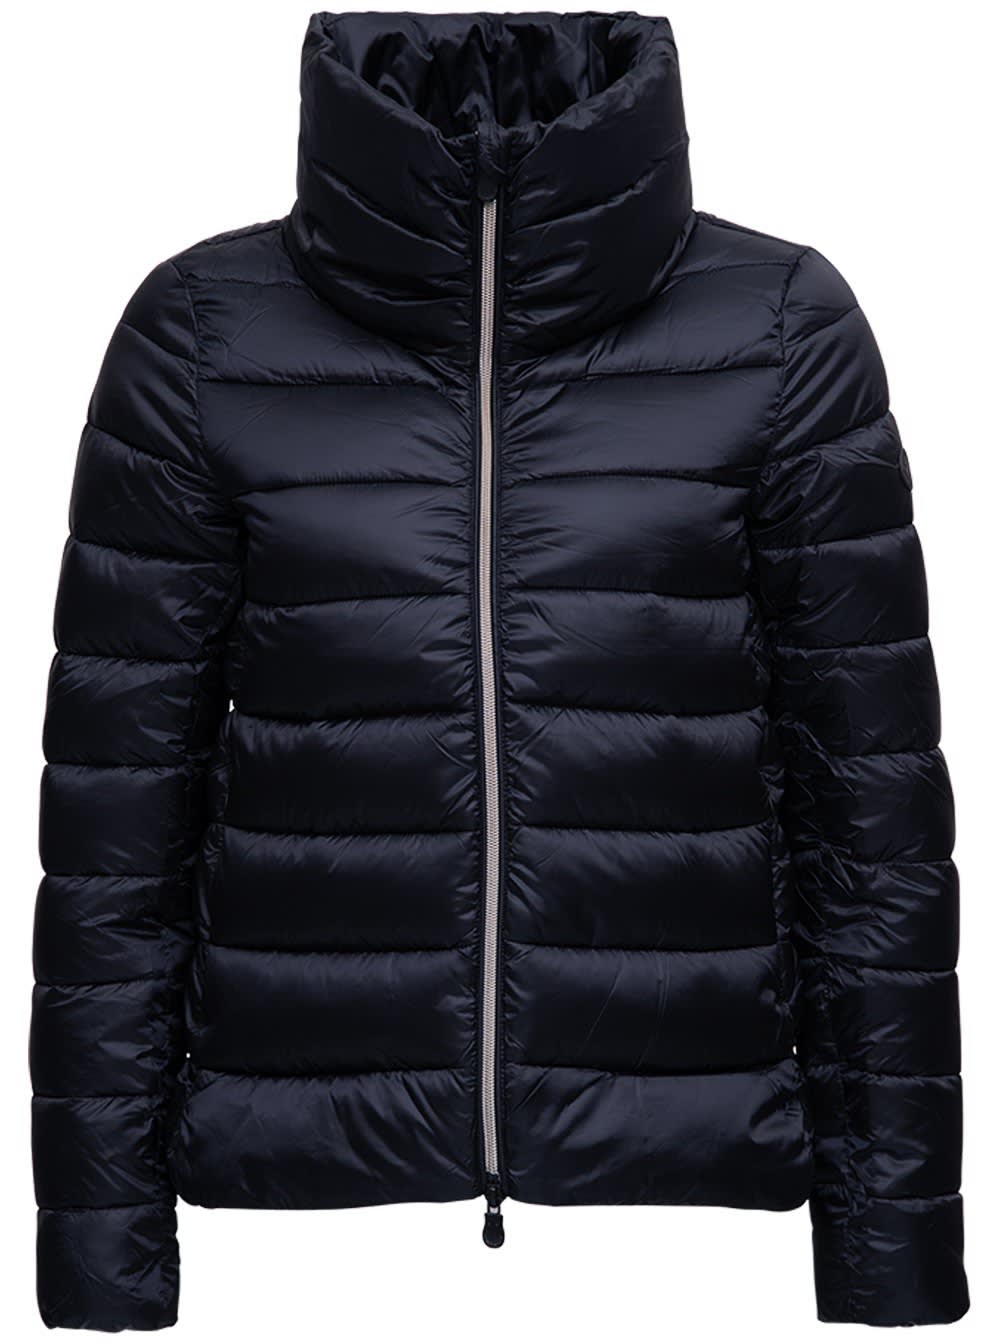 Save the Duck High Neck Ecological Black Down Jacket